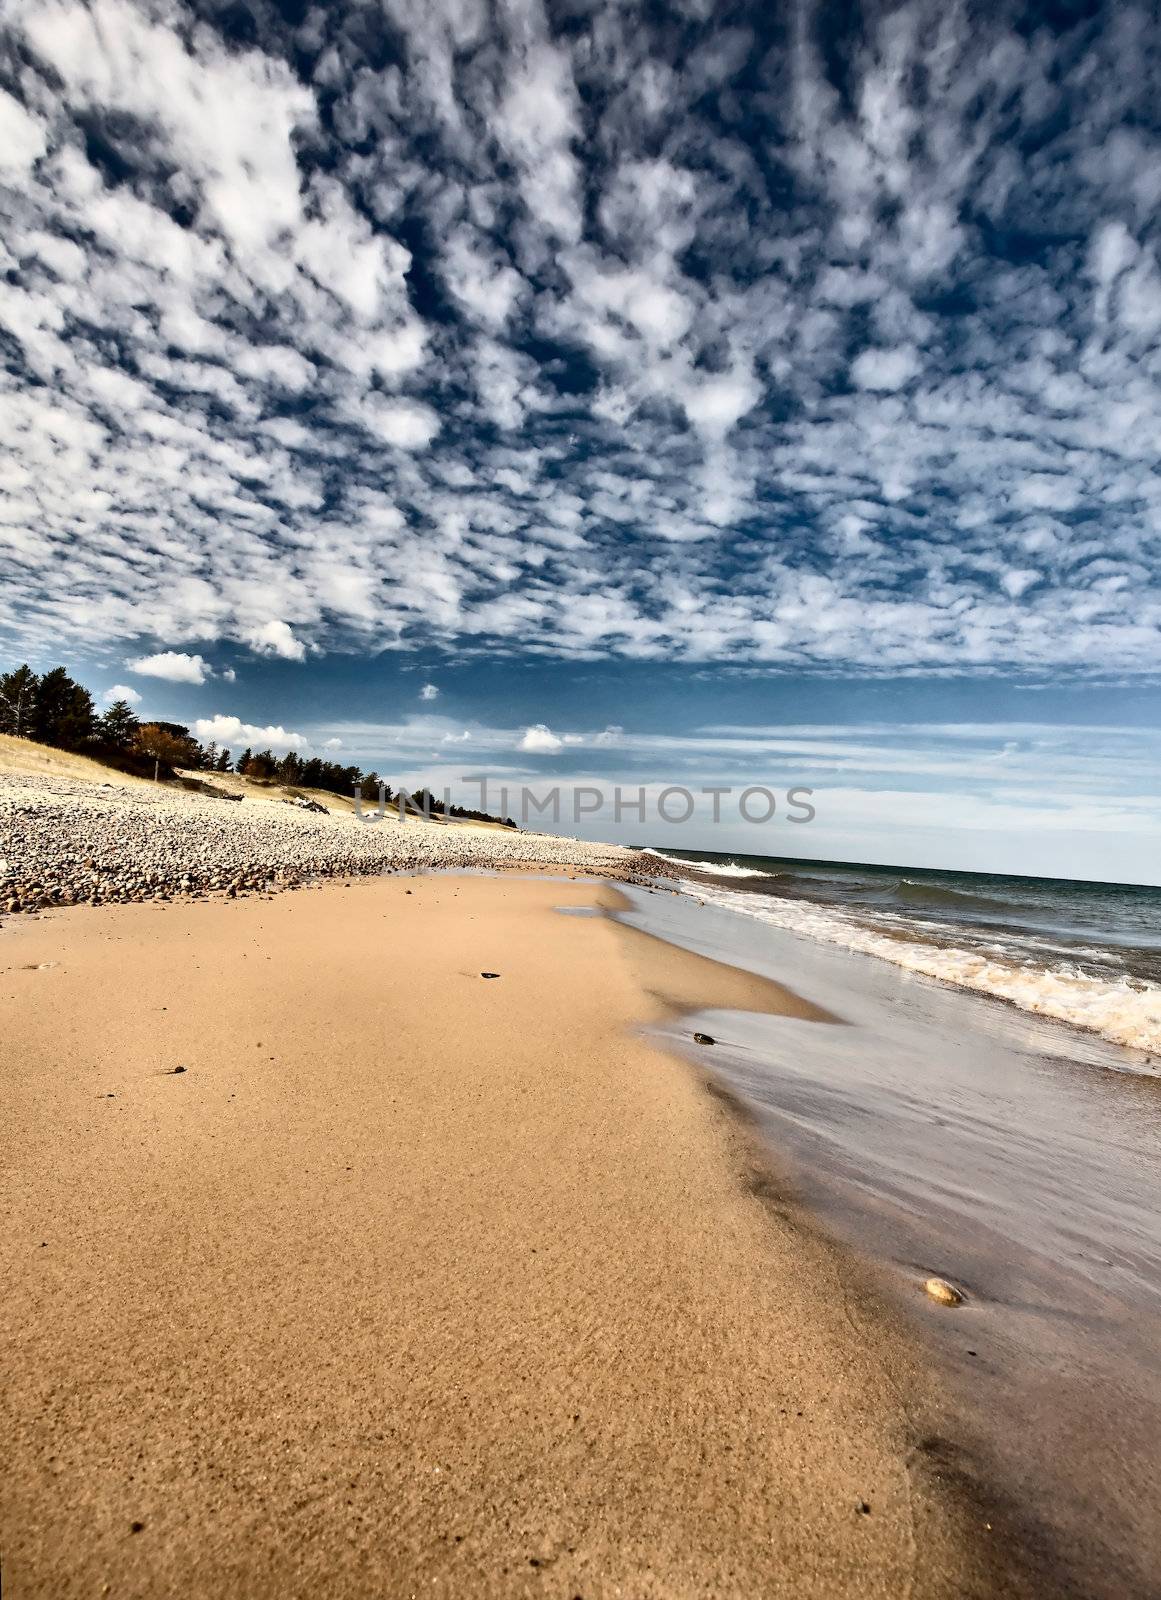 Lake Superior Northern Michigan by pictureguy